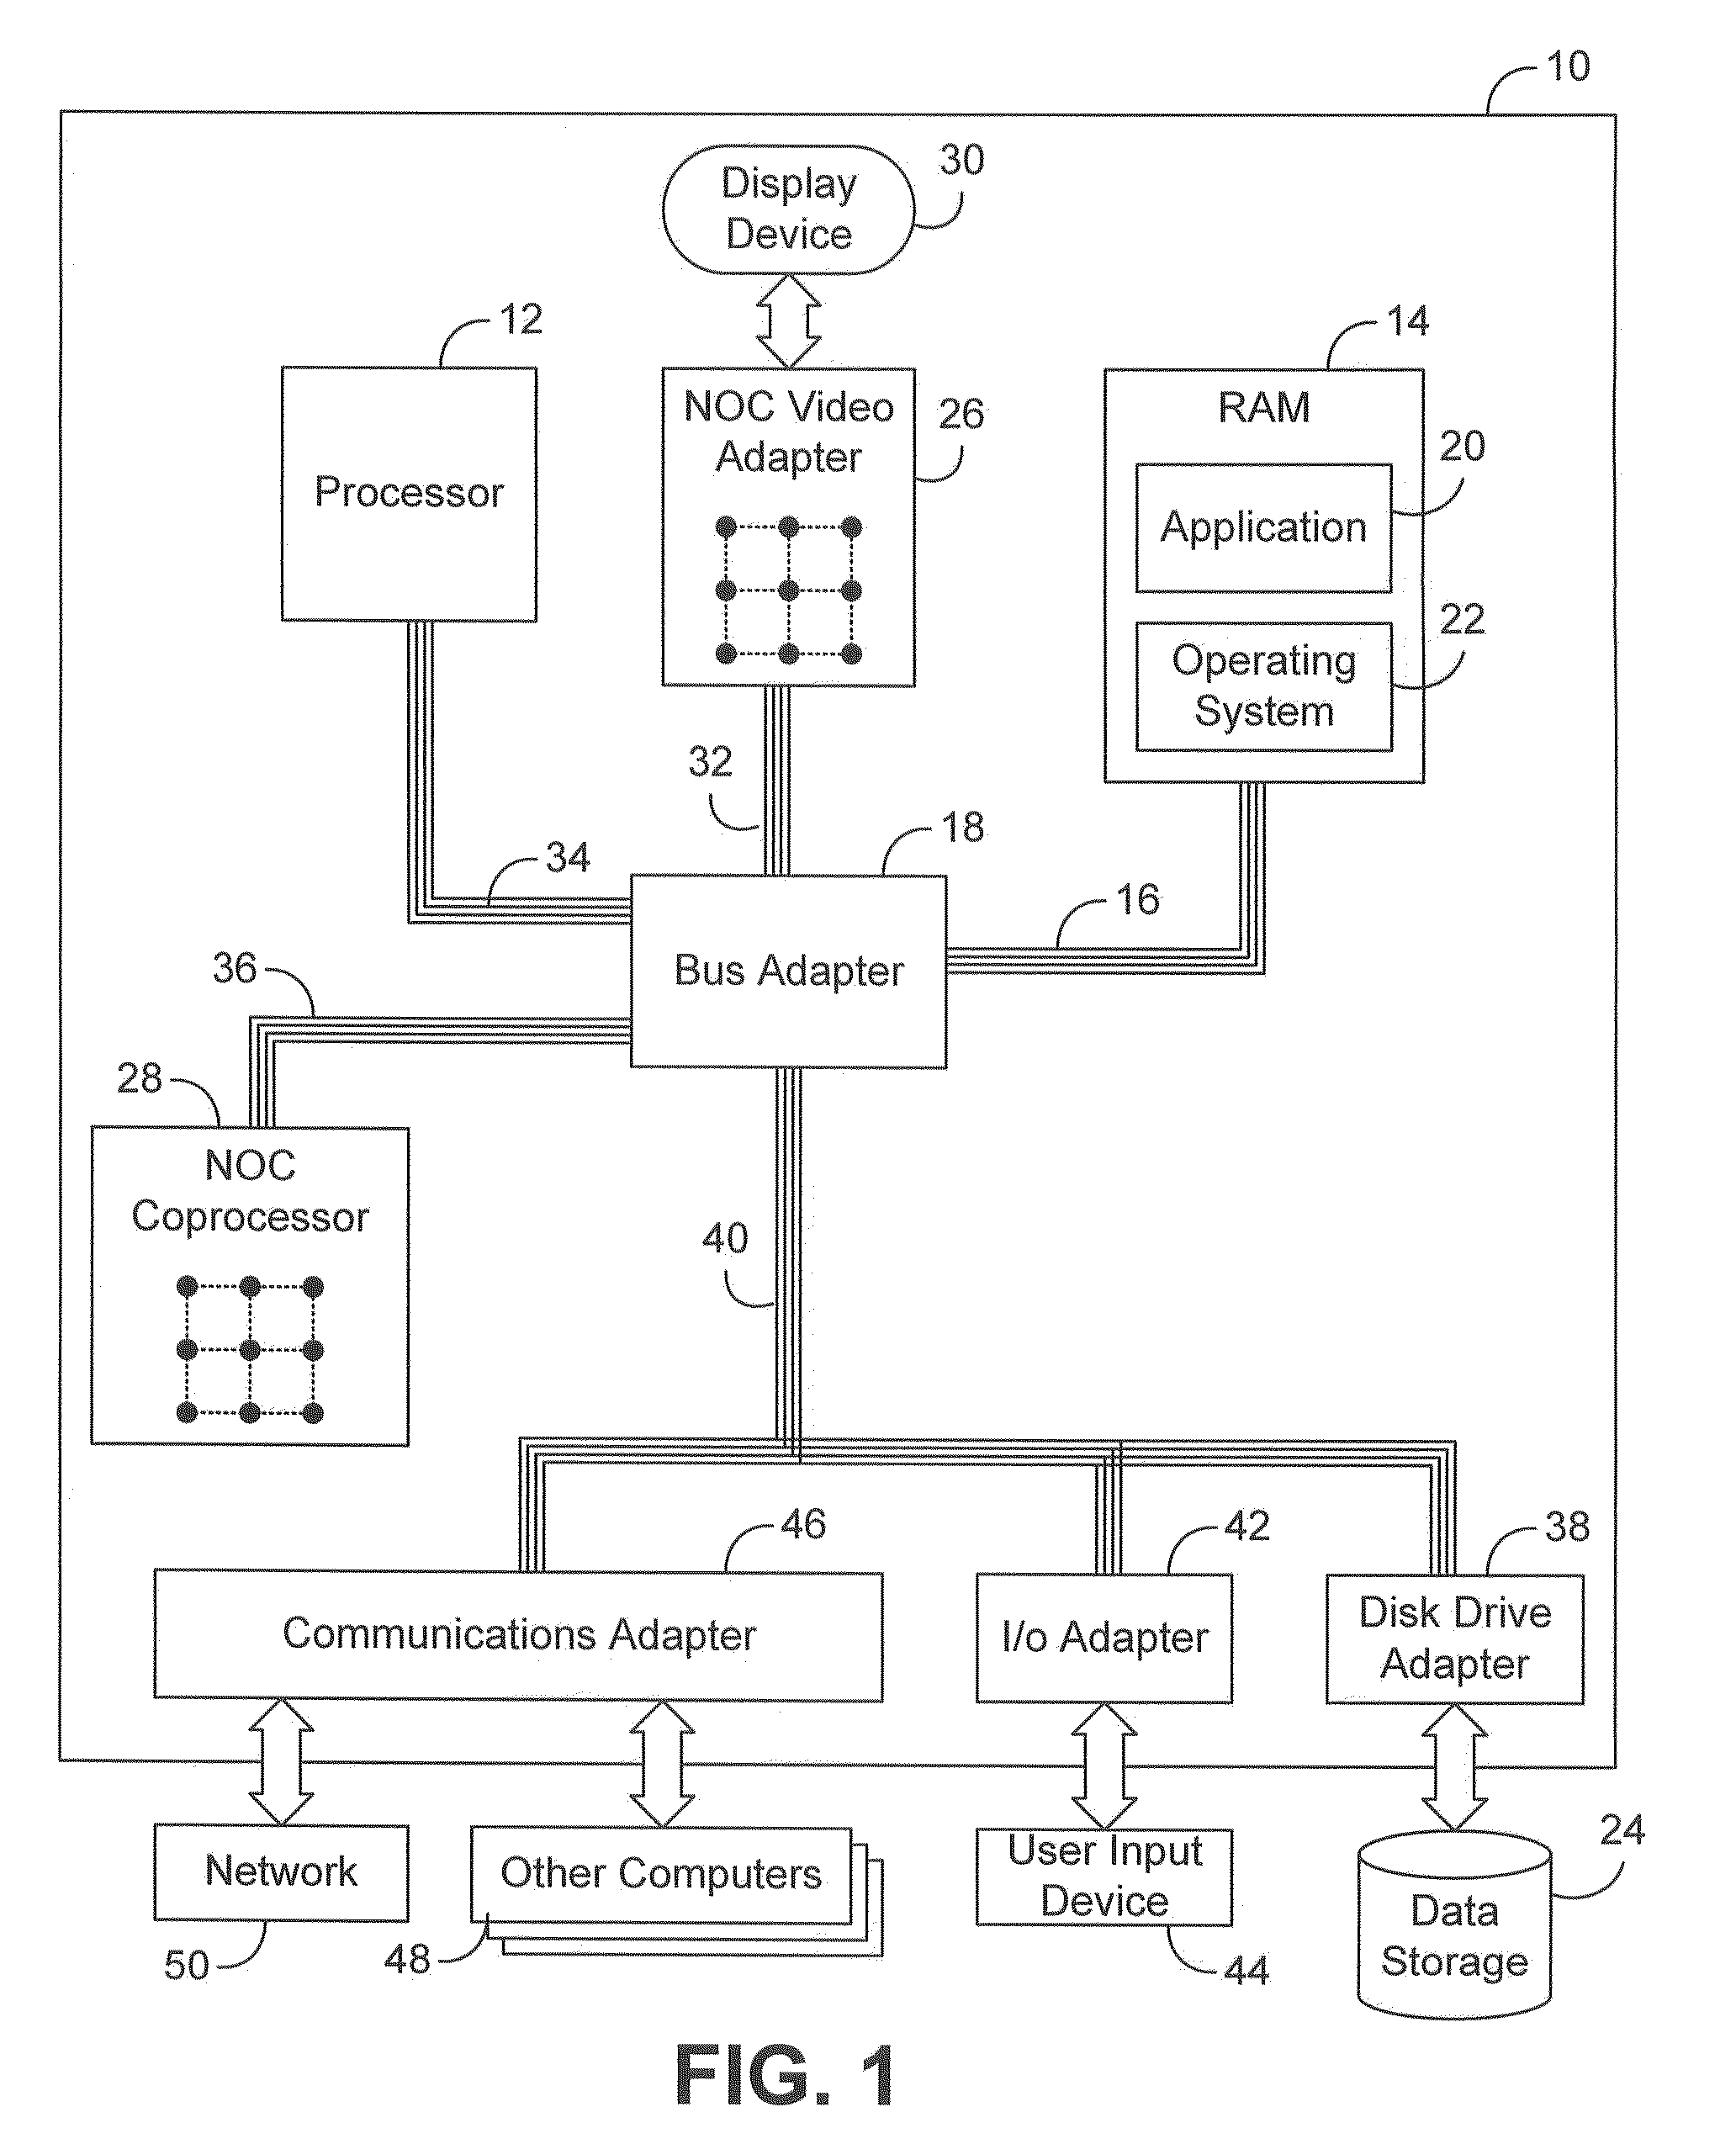 Vector register file caching of context data structure for maintaining state data in a multithreaded image processing pipeline